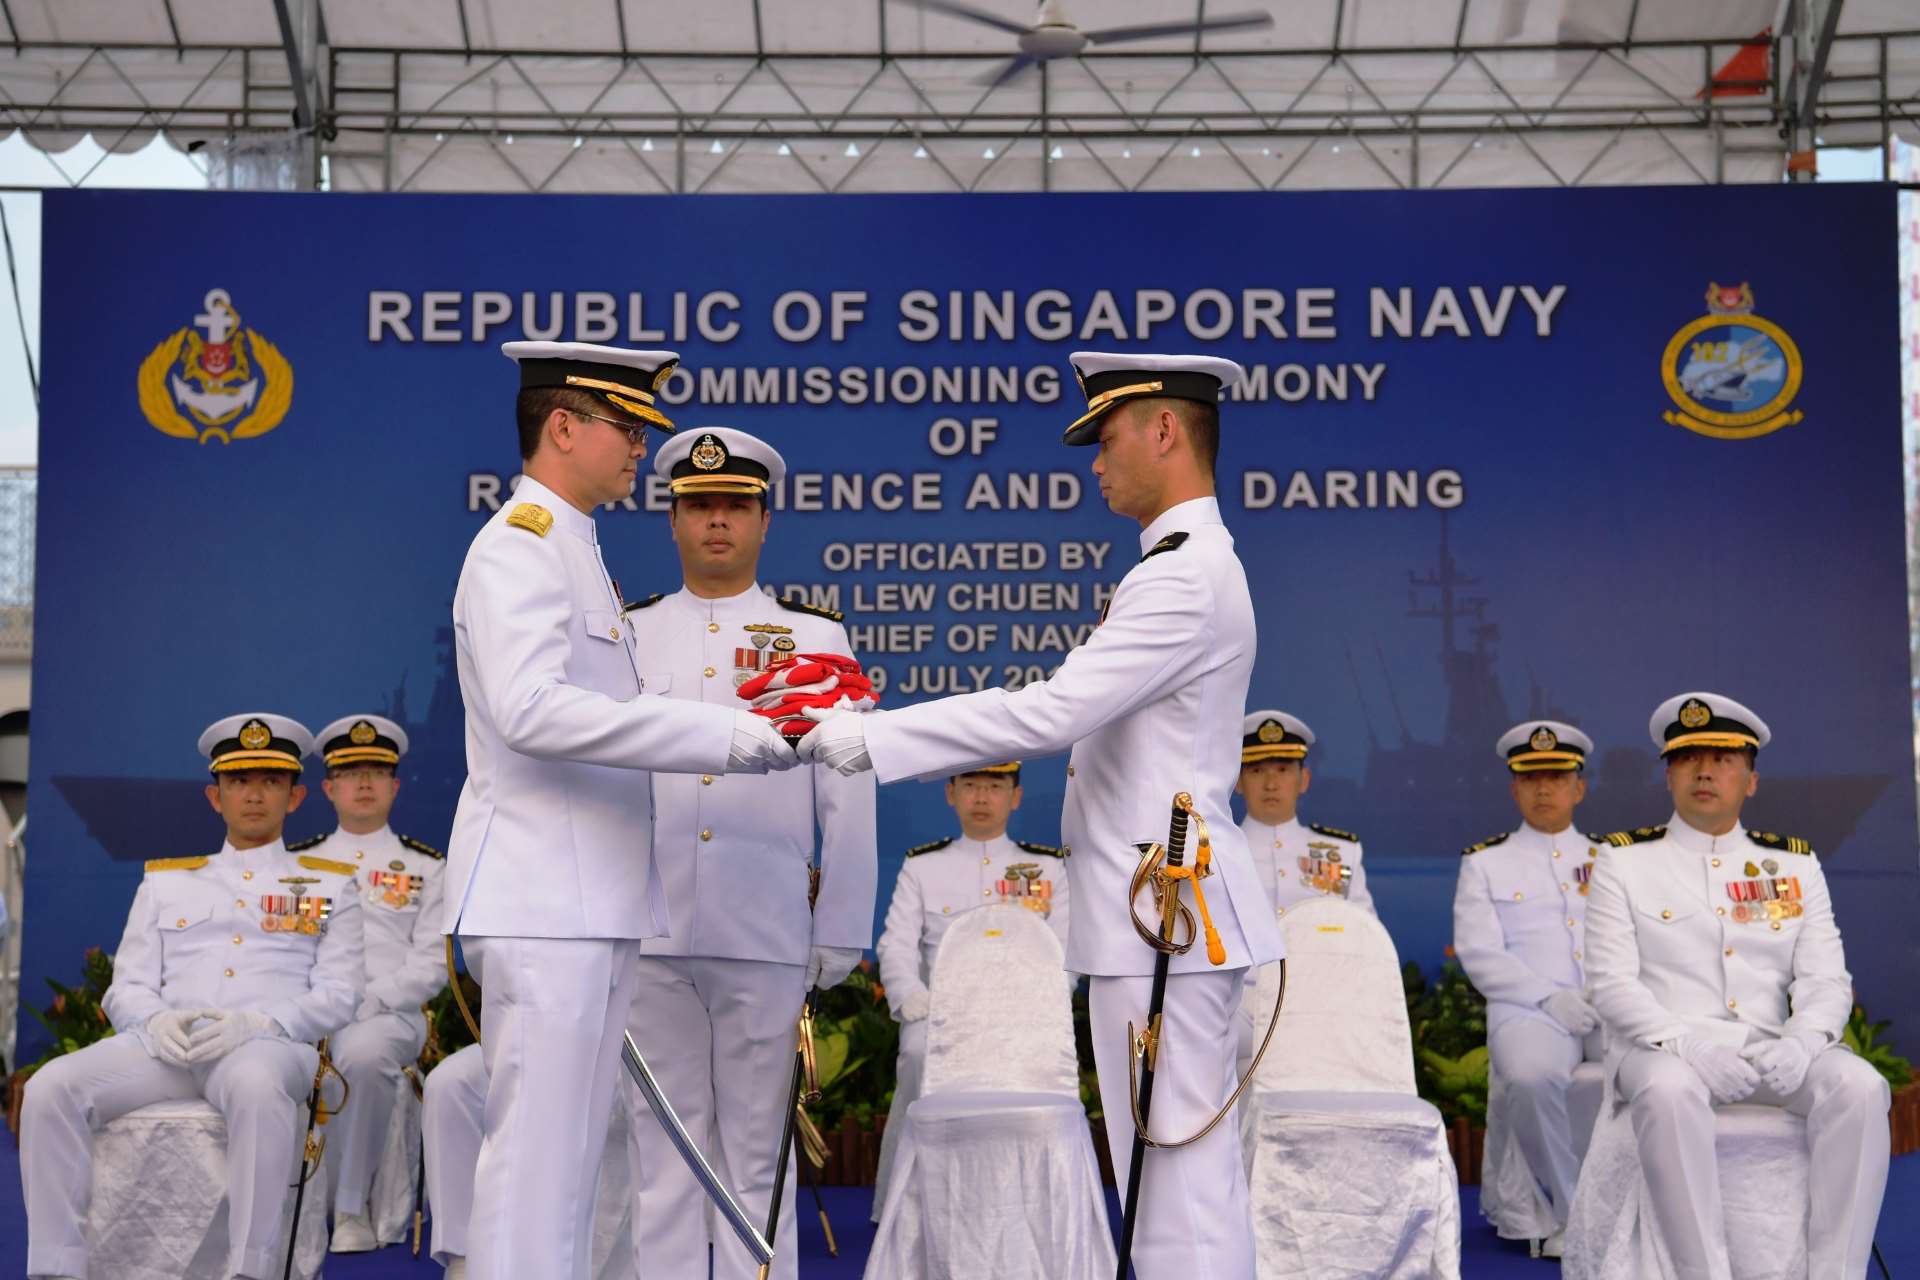 Commanding Officer RSS Resilience, Major Lee Pui Yau (front, right) presenting RSS Resilience's jack, ensigns and commissioning pennant to Chief of Navy Rear-Admiral Lew Chuen Hong (front, left) at the decommissioning ceremony.